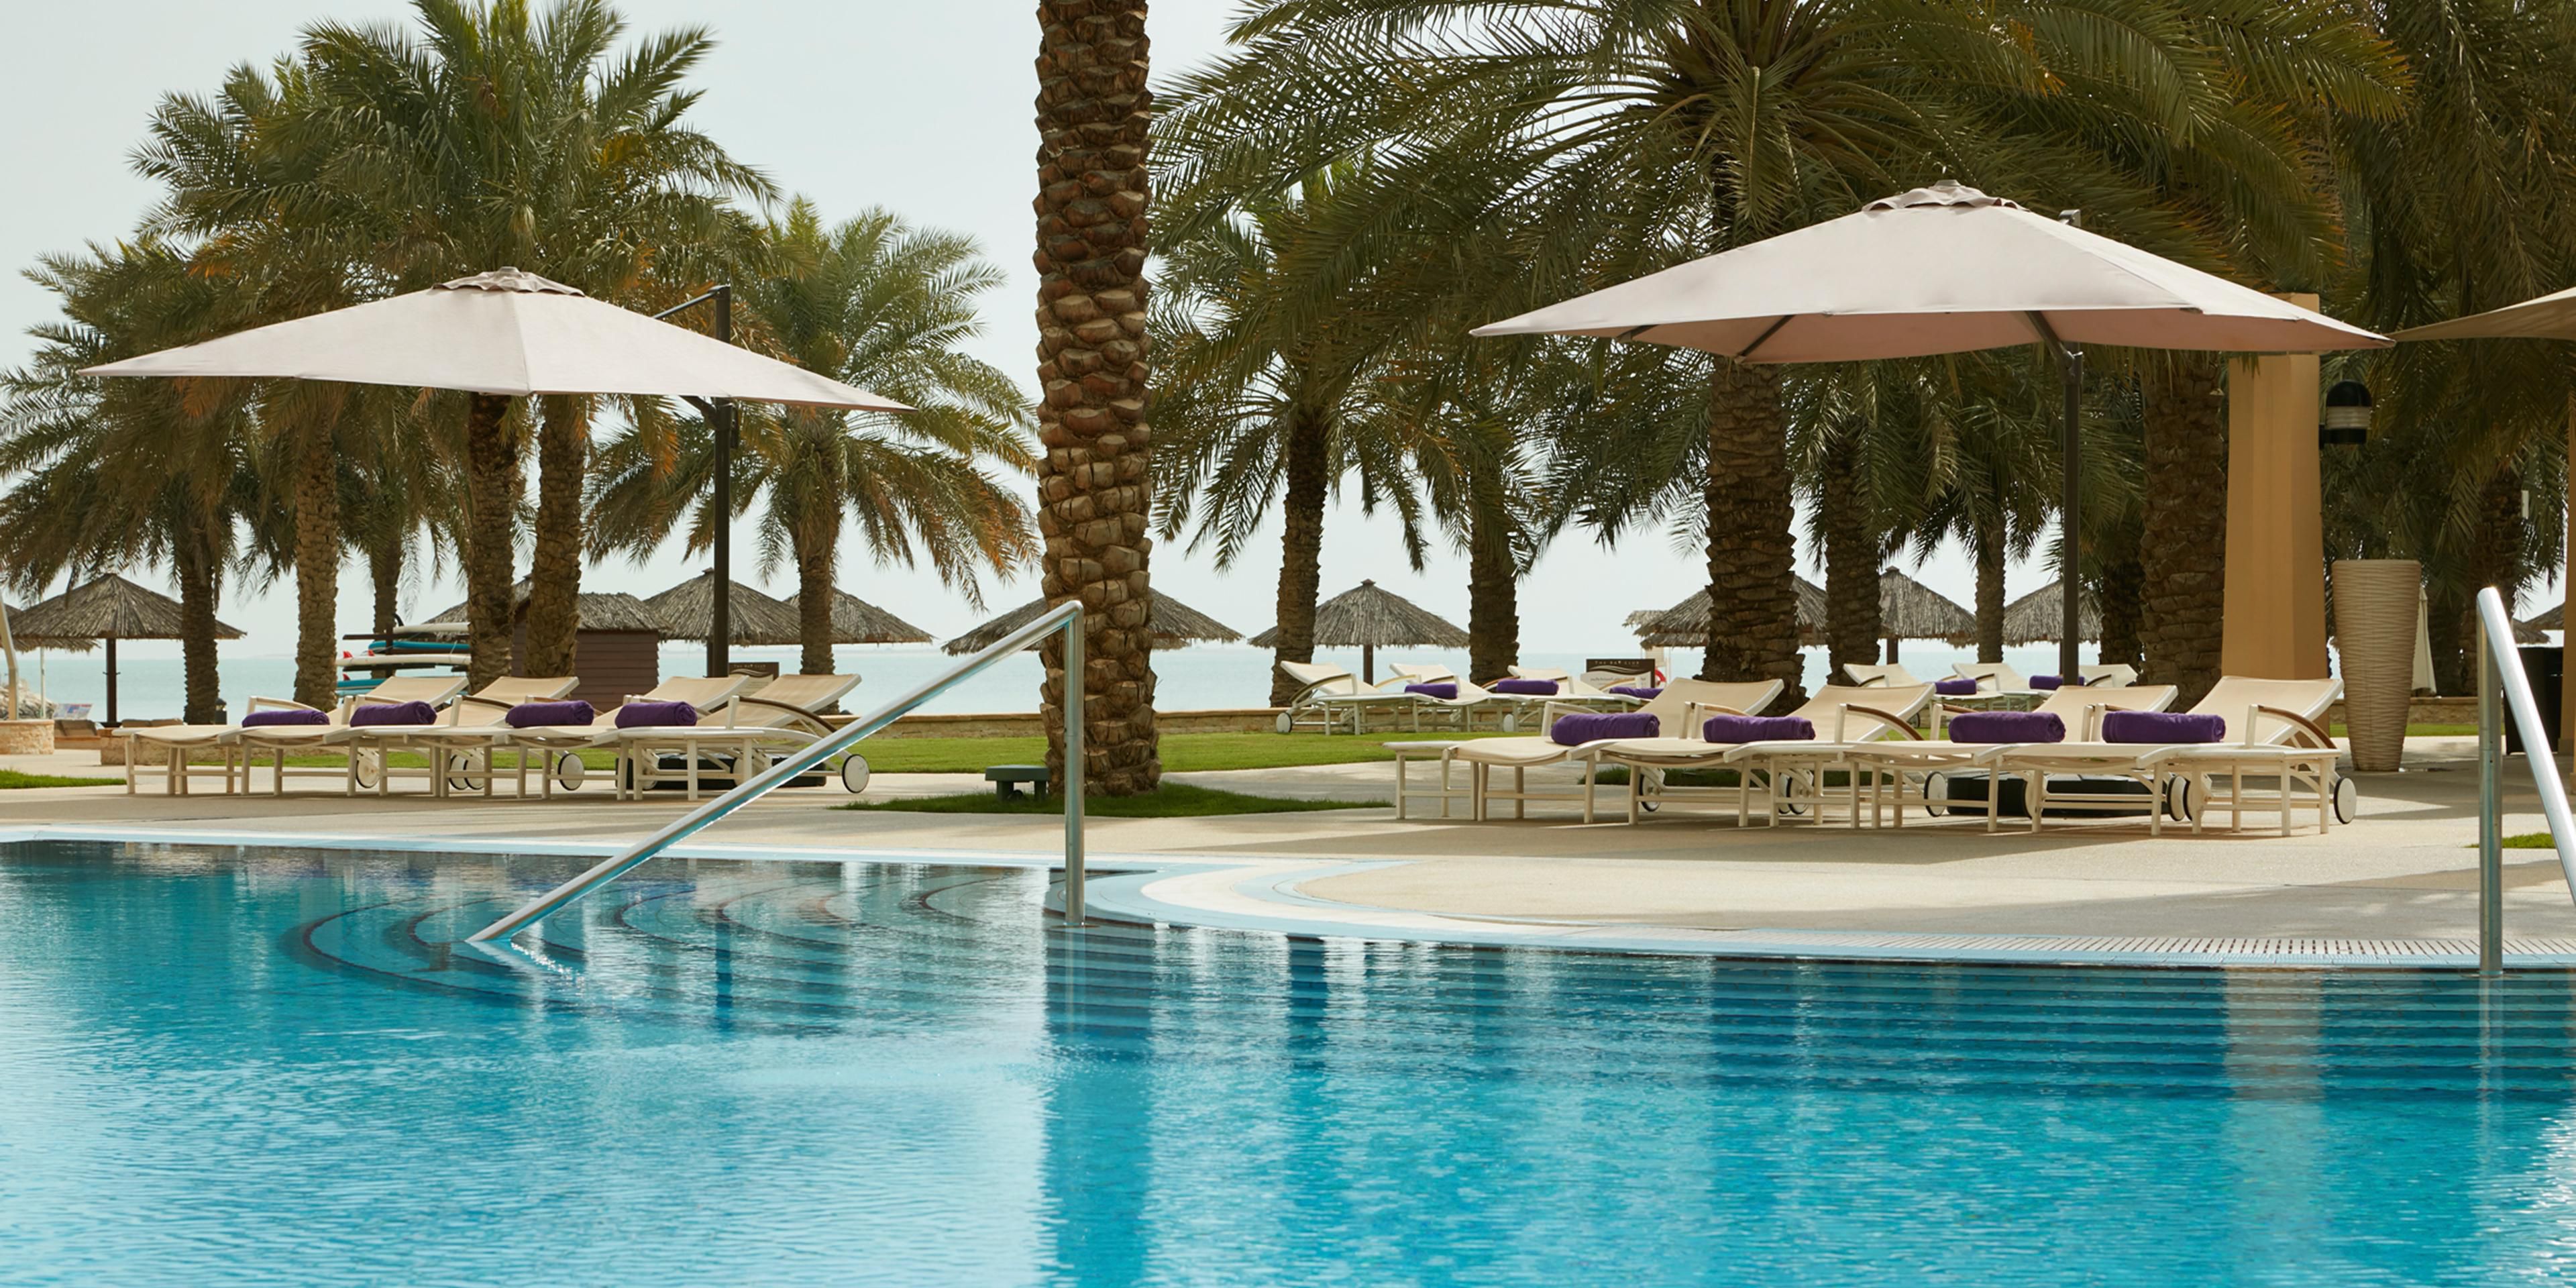 Soak in the sunshine at Doha's longest private beach, or relax by the pool. The Bay Club offers endless recreation options such as its high end 24-hour gymnasium, tennis and squash courts, fitness classes, watersports, and many more. 